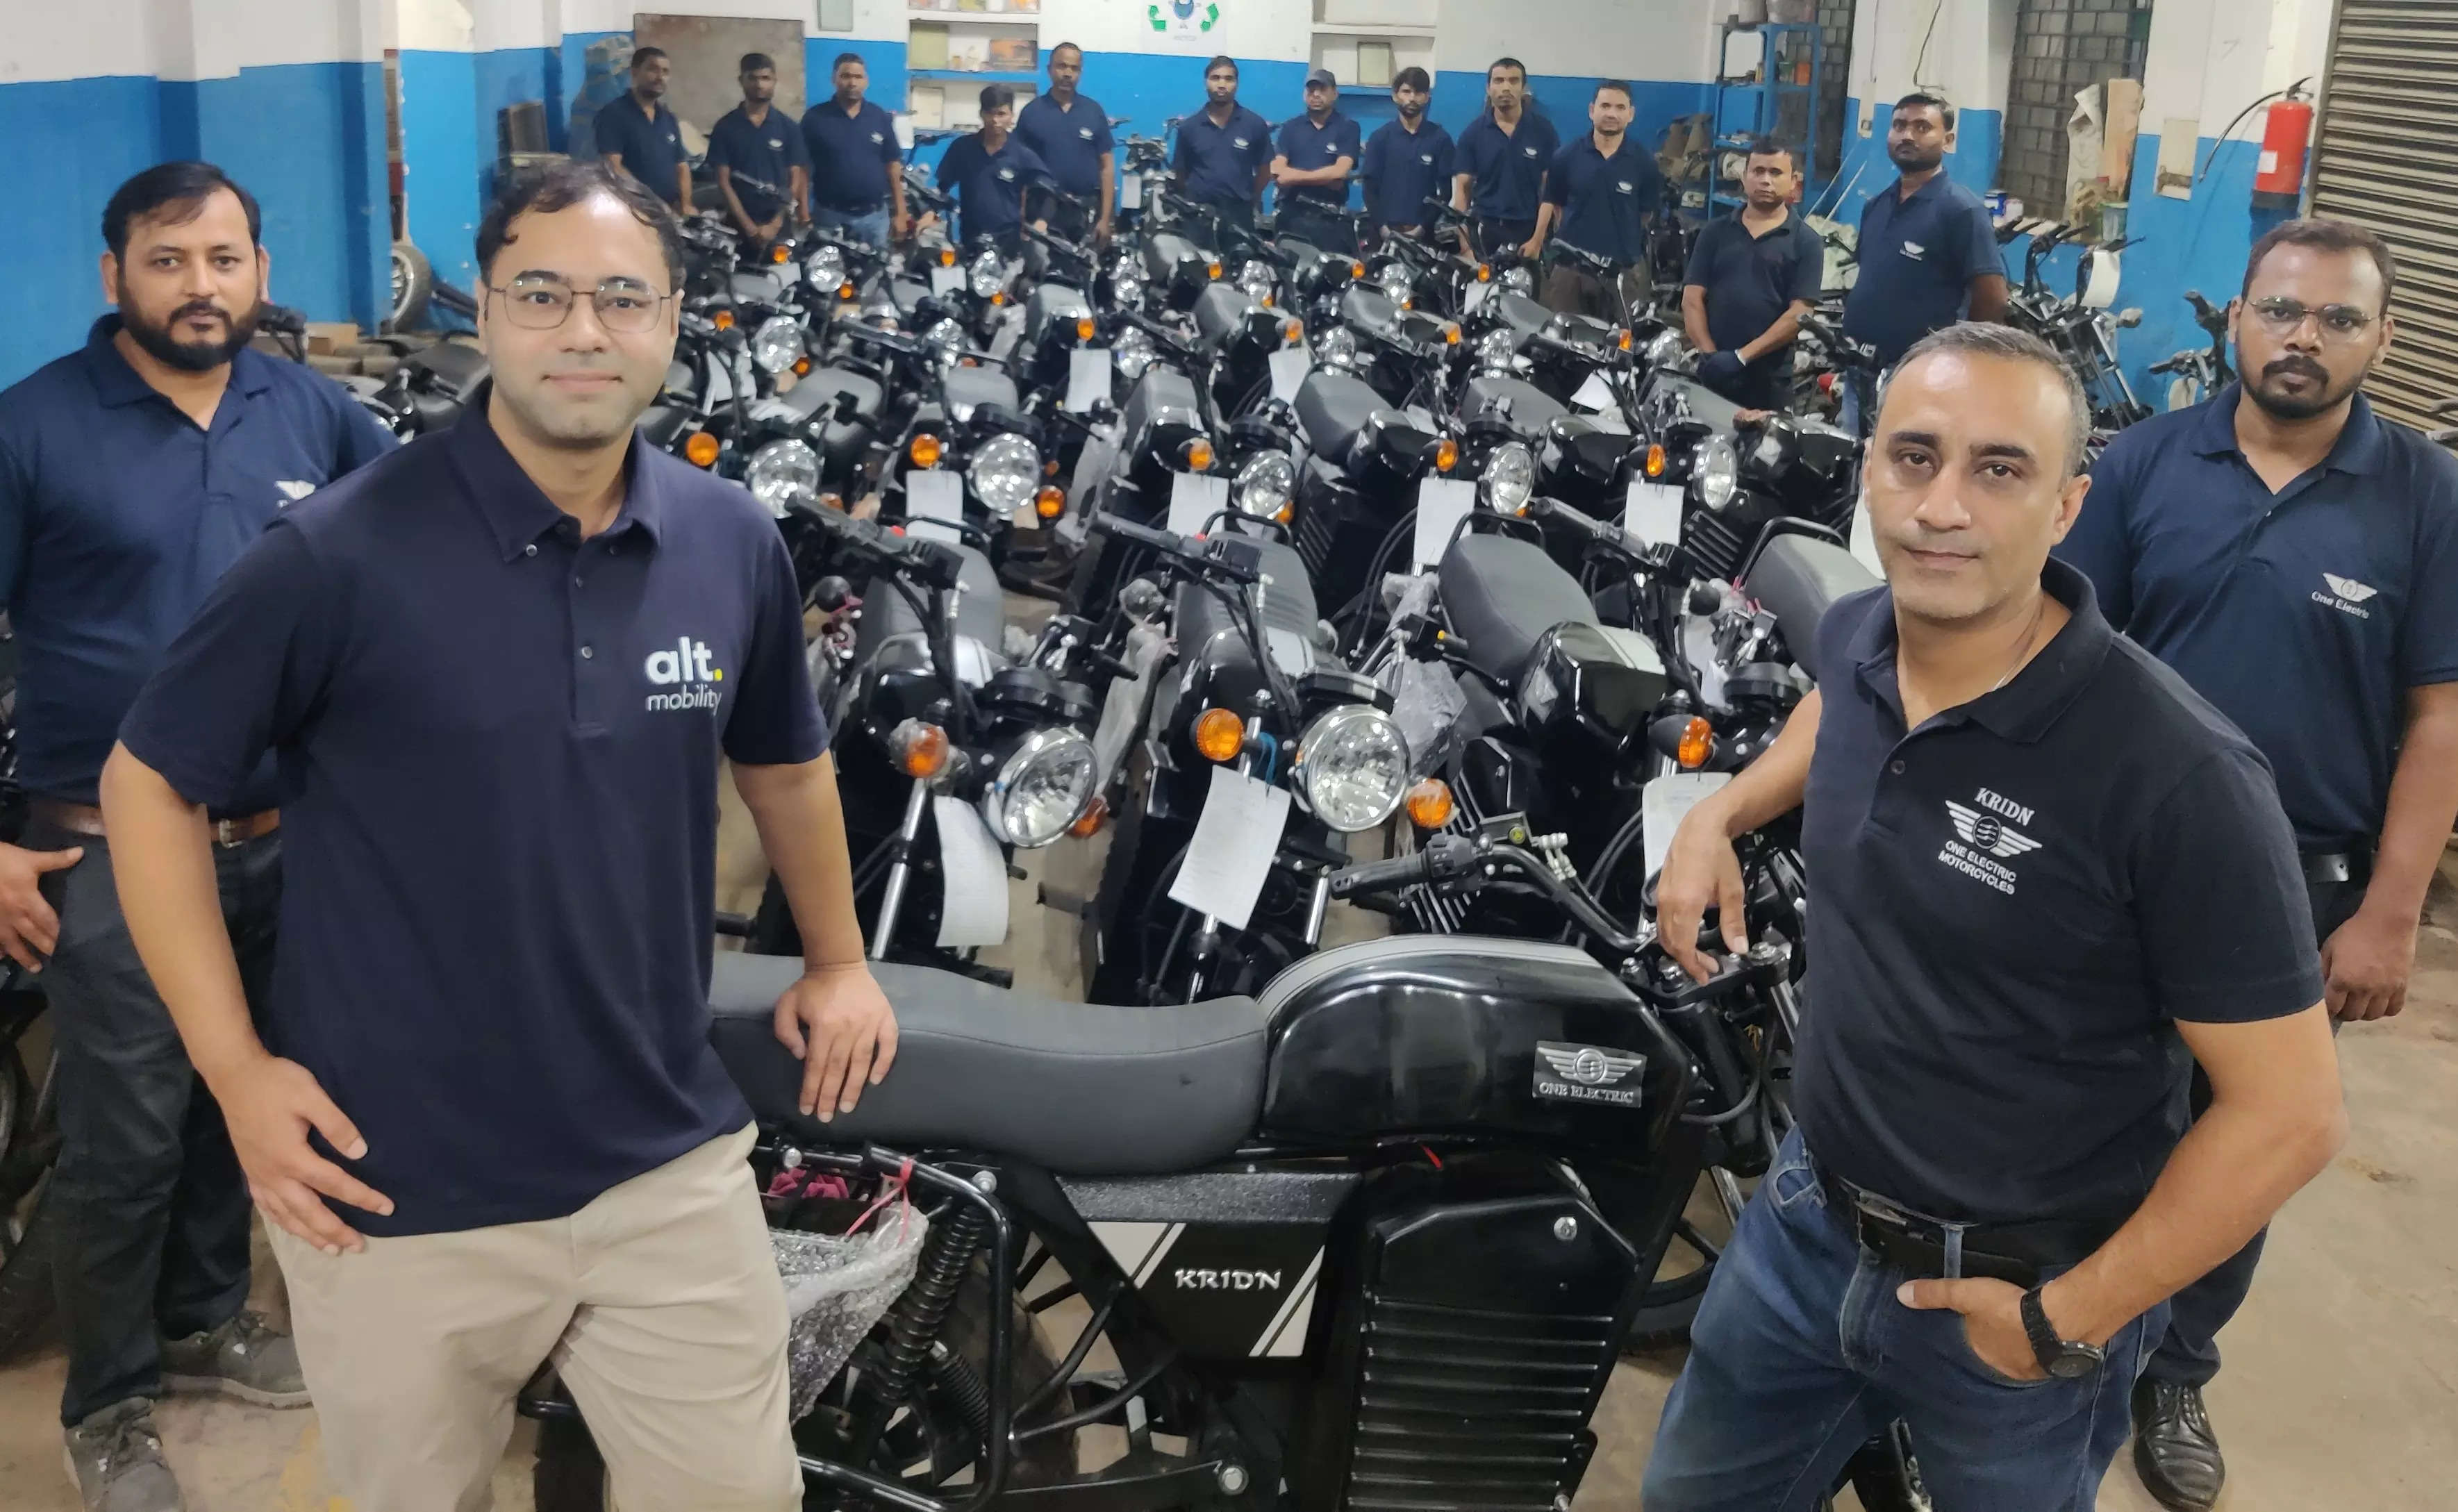  One Electric Motorcycles and ALT Mobility are aiming to provide confidence to their clients looking for over 5 years of vehicle life.